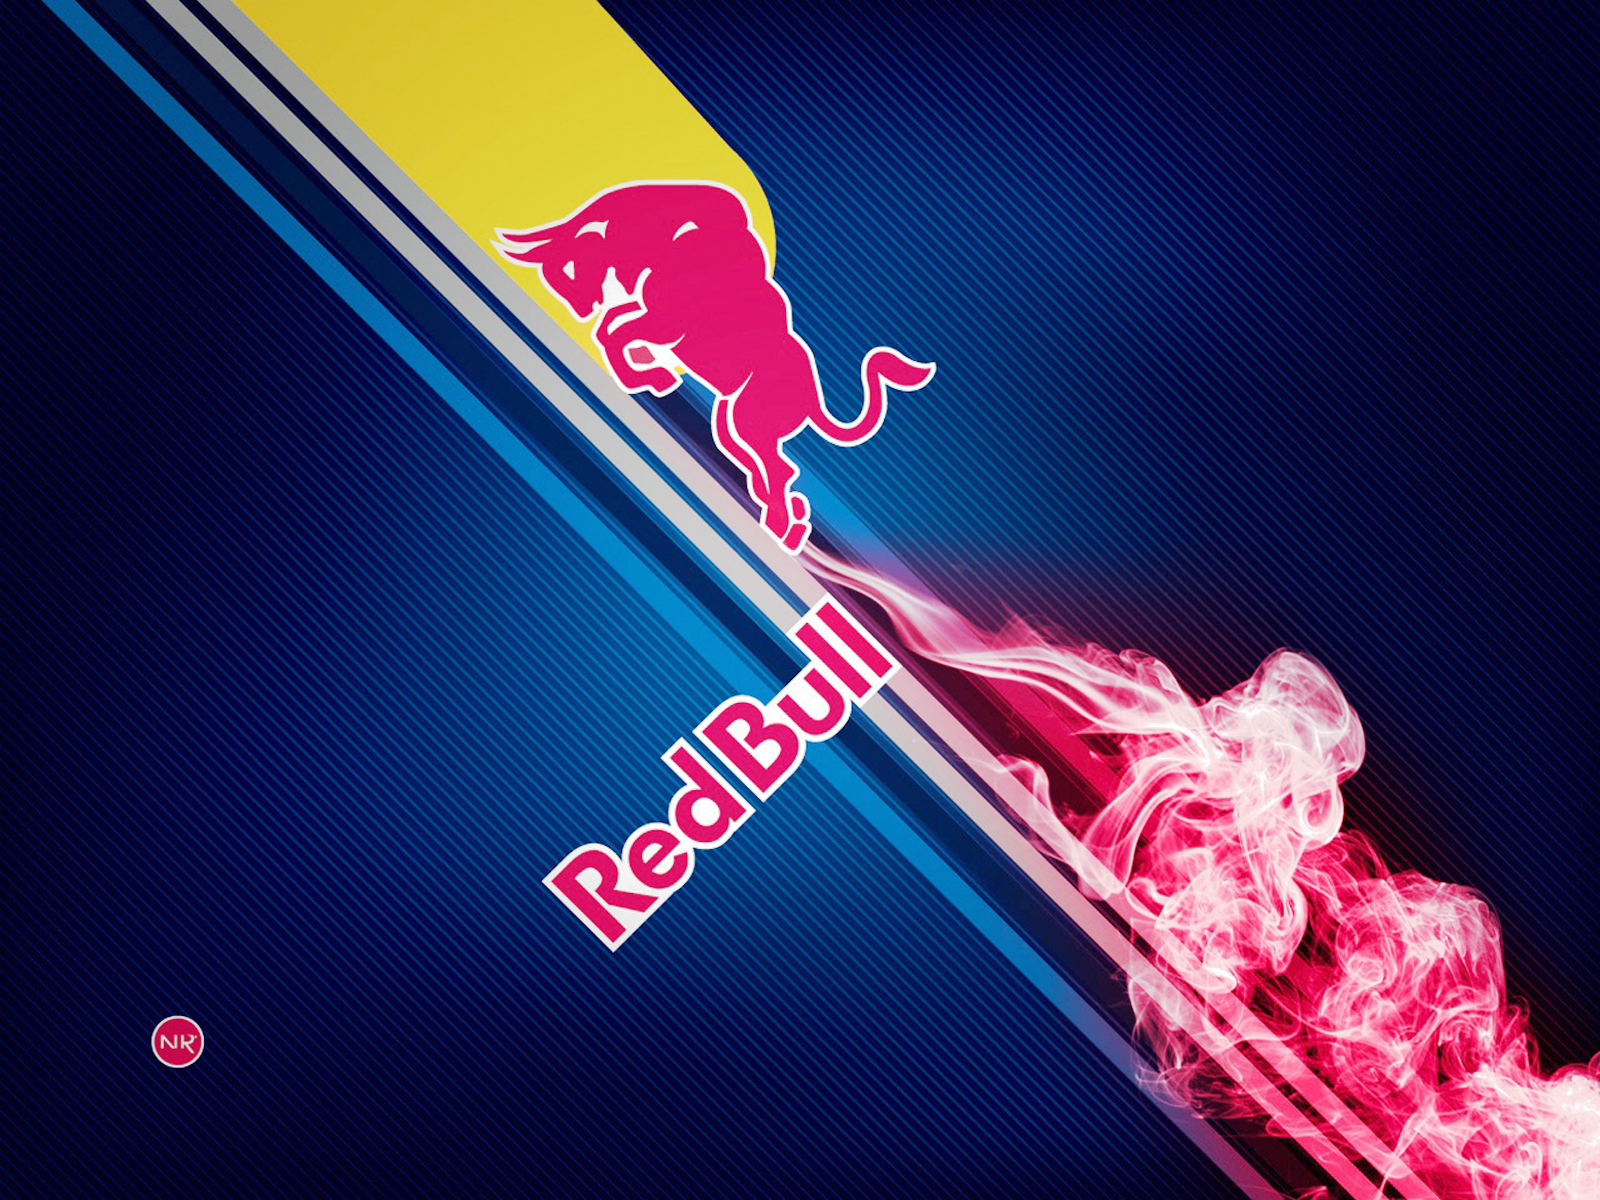 Red Bull HD Logo Wallpapers Download Free Wallpapers in HD for your